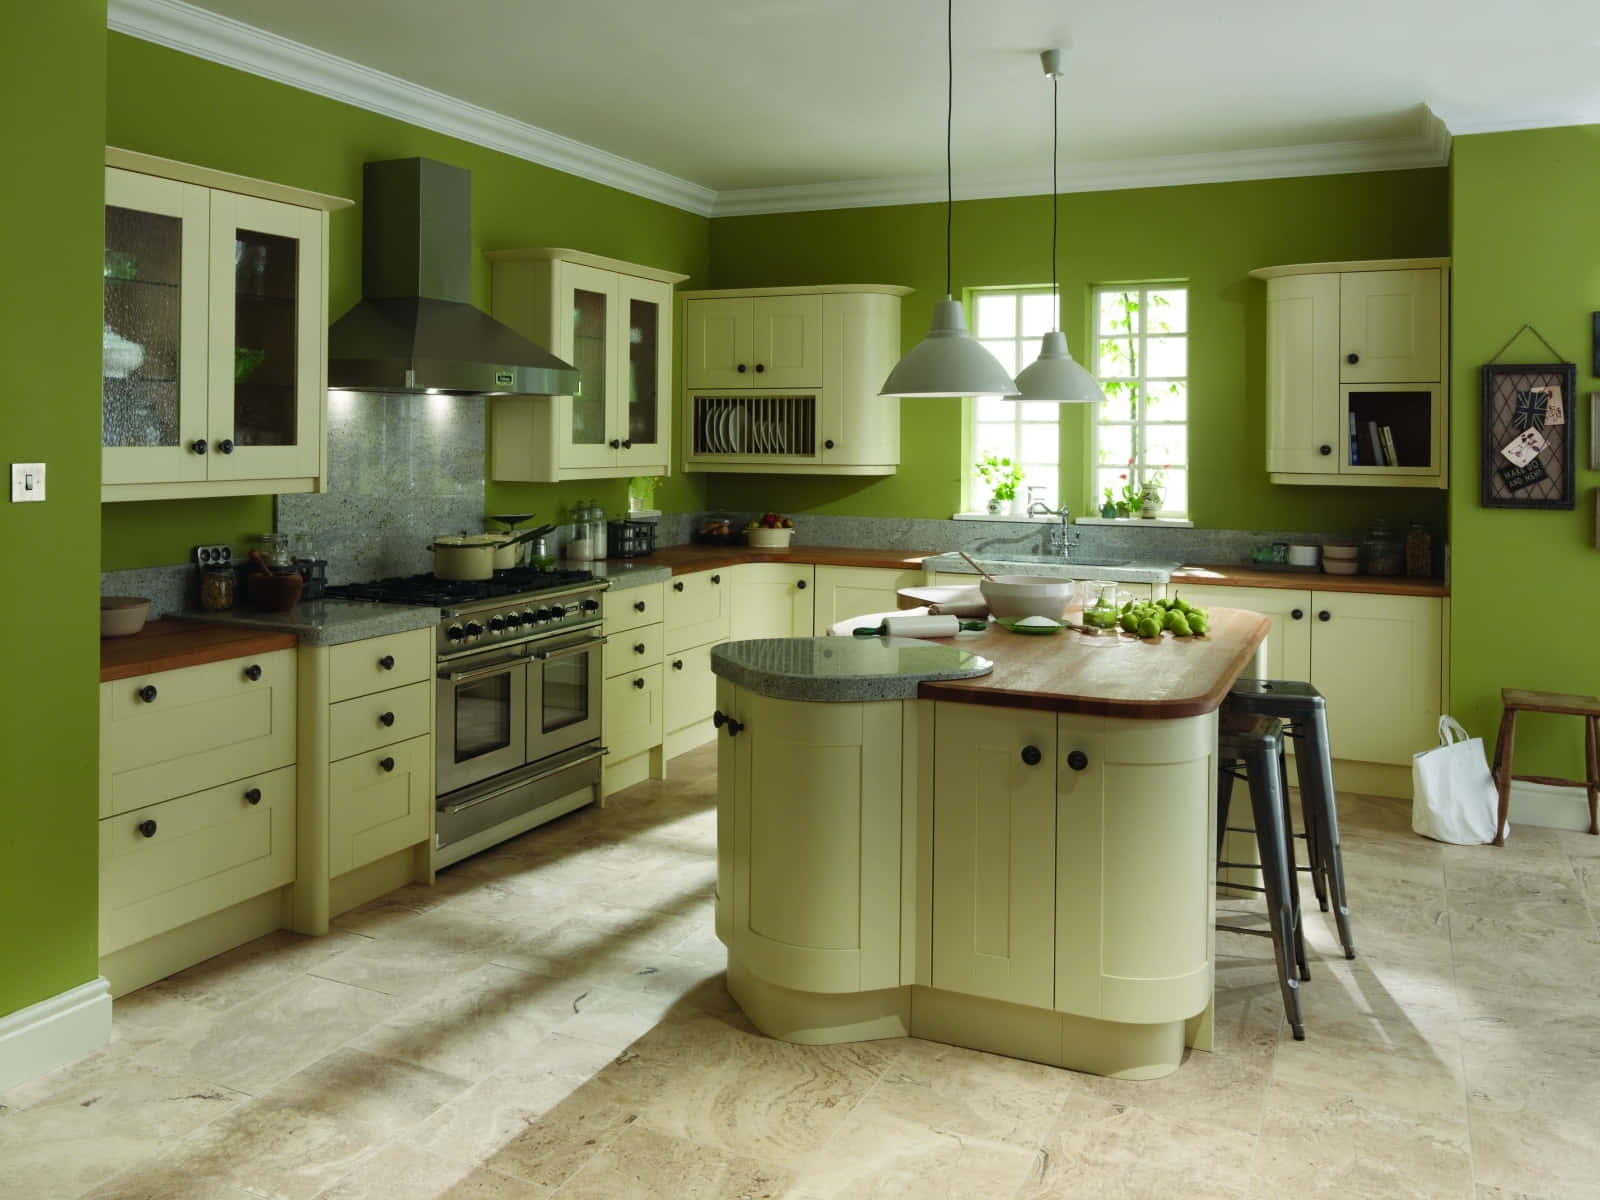 A Kitchen With Green Walls And White Counter Tops